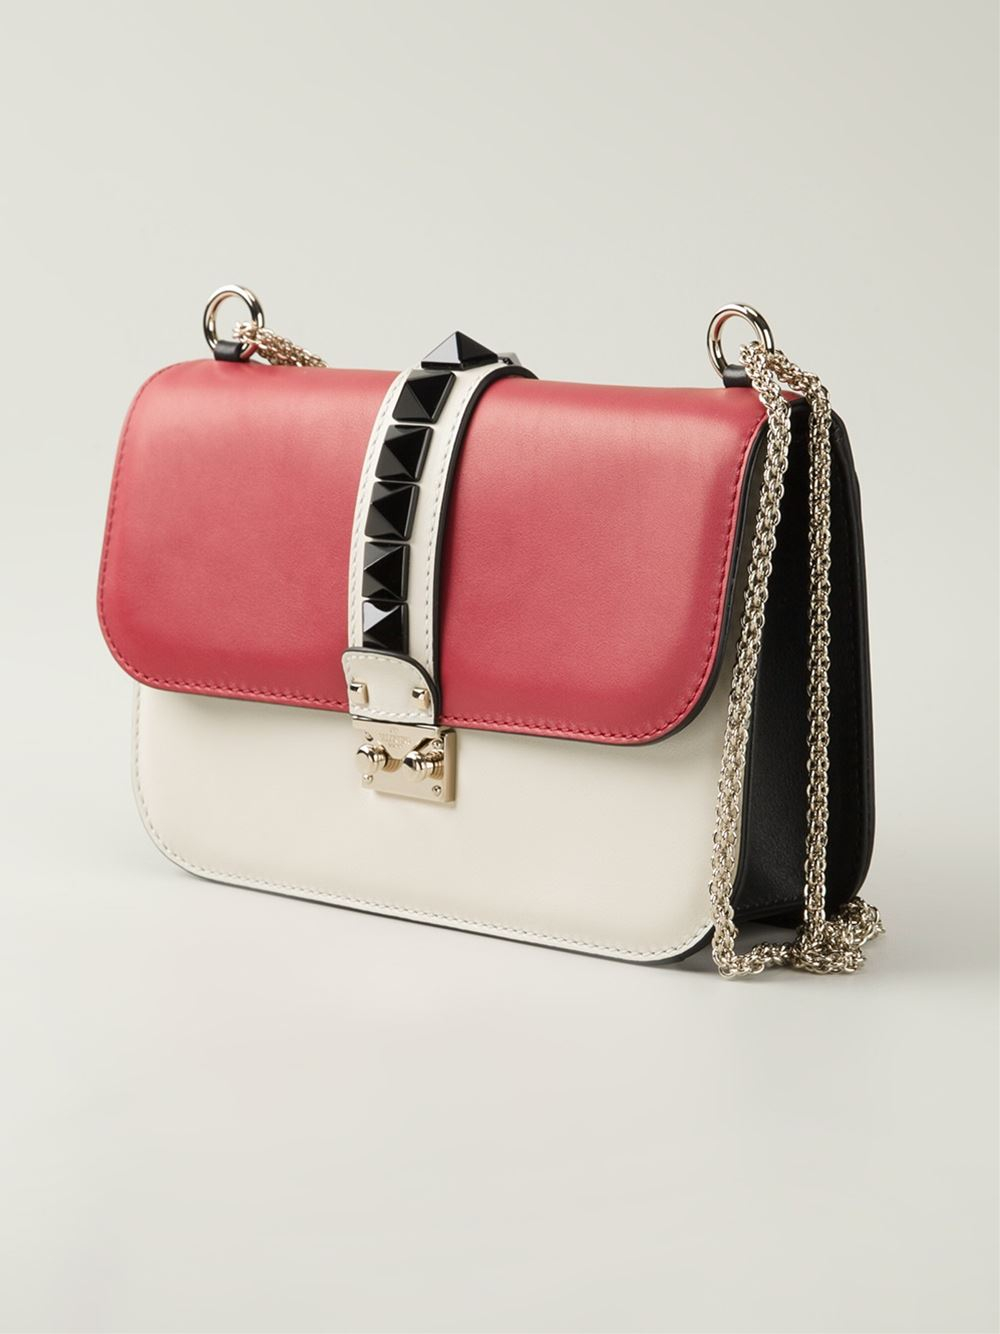 Lyst - Valentino Glam Lock Leather Shoulder Bag in White